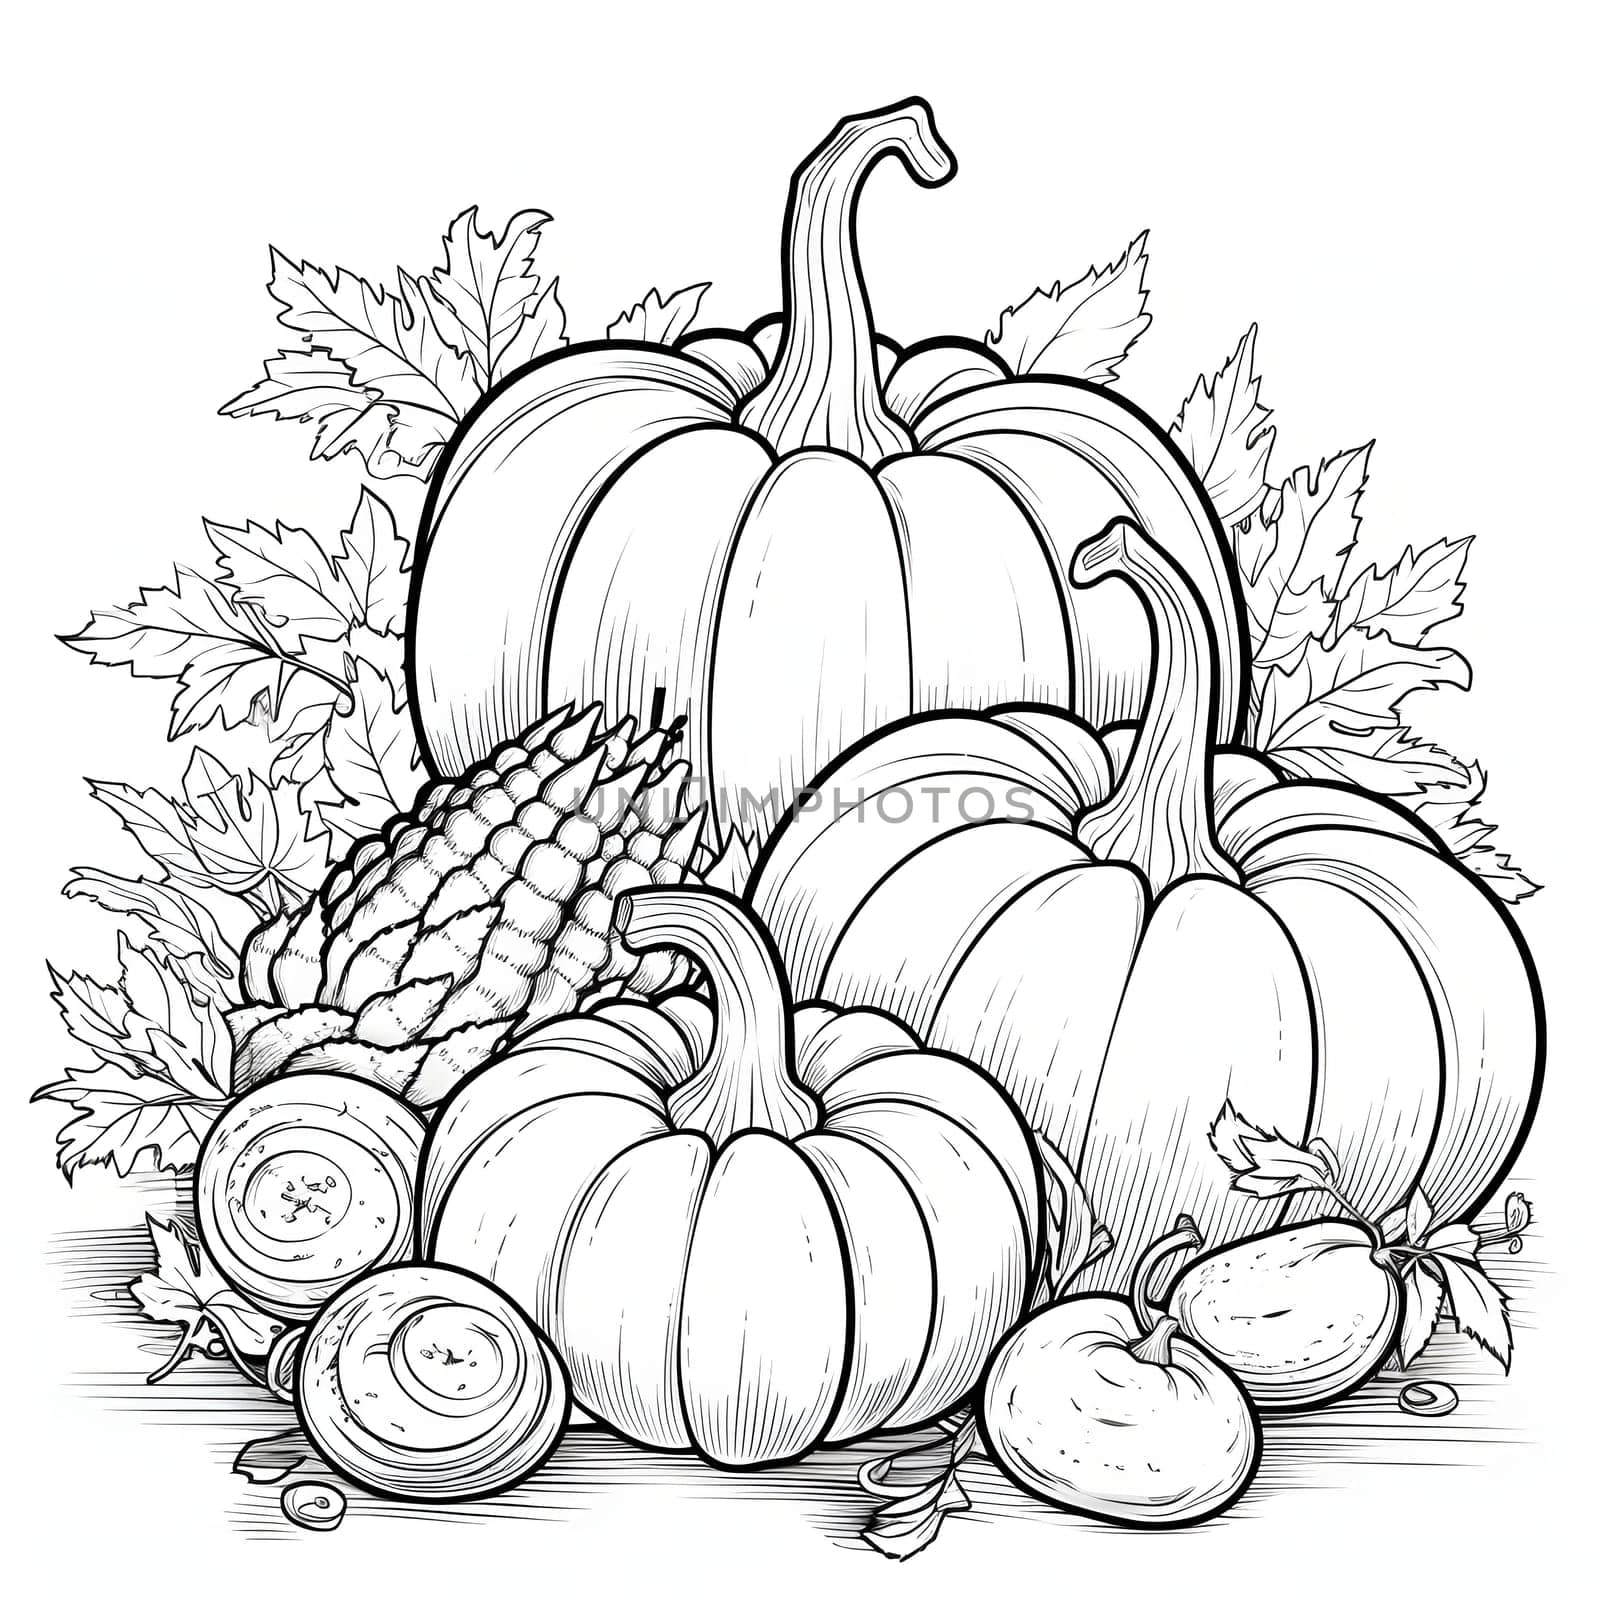 Black and White coloring book, harvest from the field of pumpkins, corn, leaves. Pumpkin as a dish of thanksgiving for the harvest, picture on a white isolated background. Atmosphere of joy and celebration.